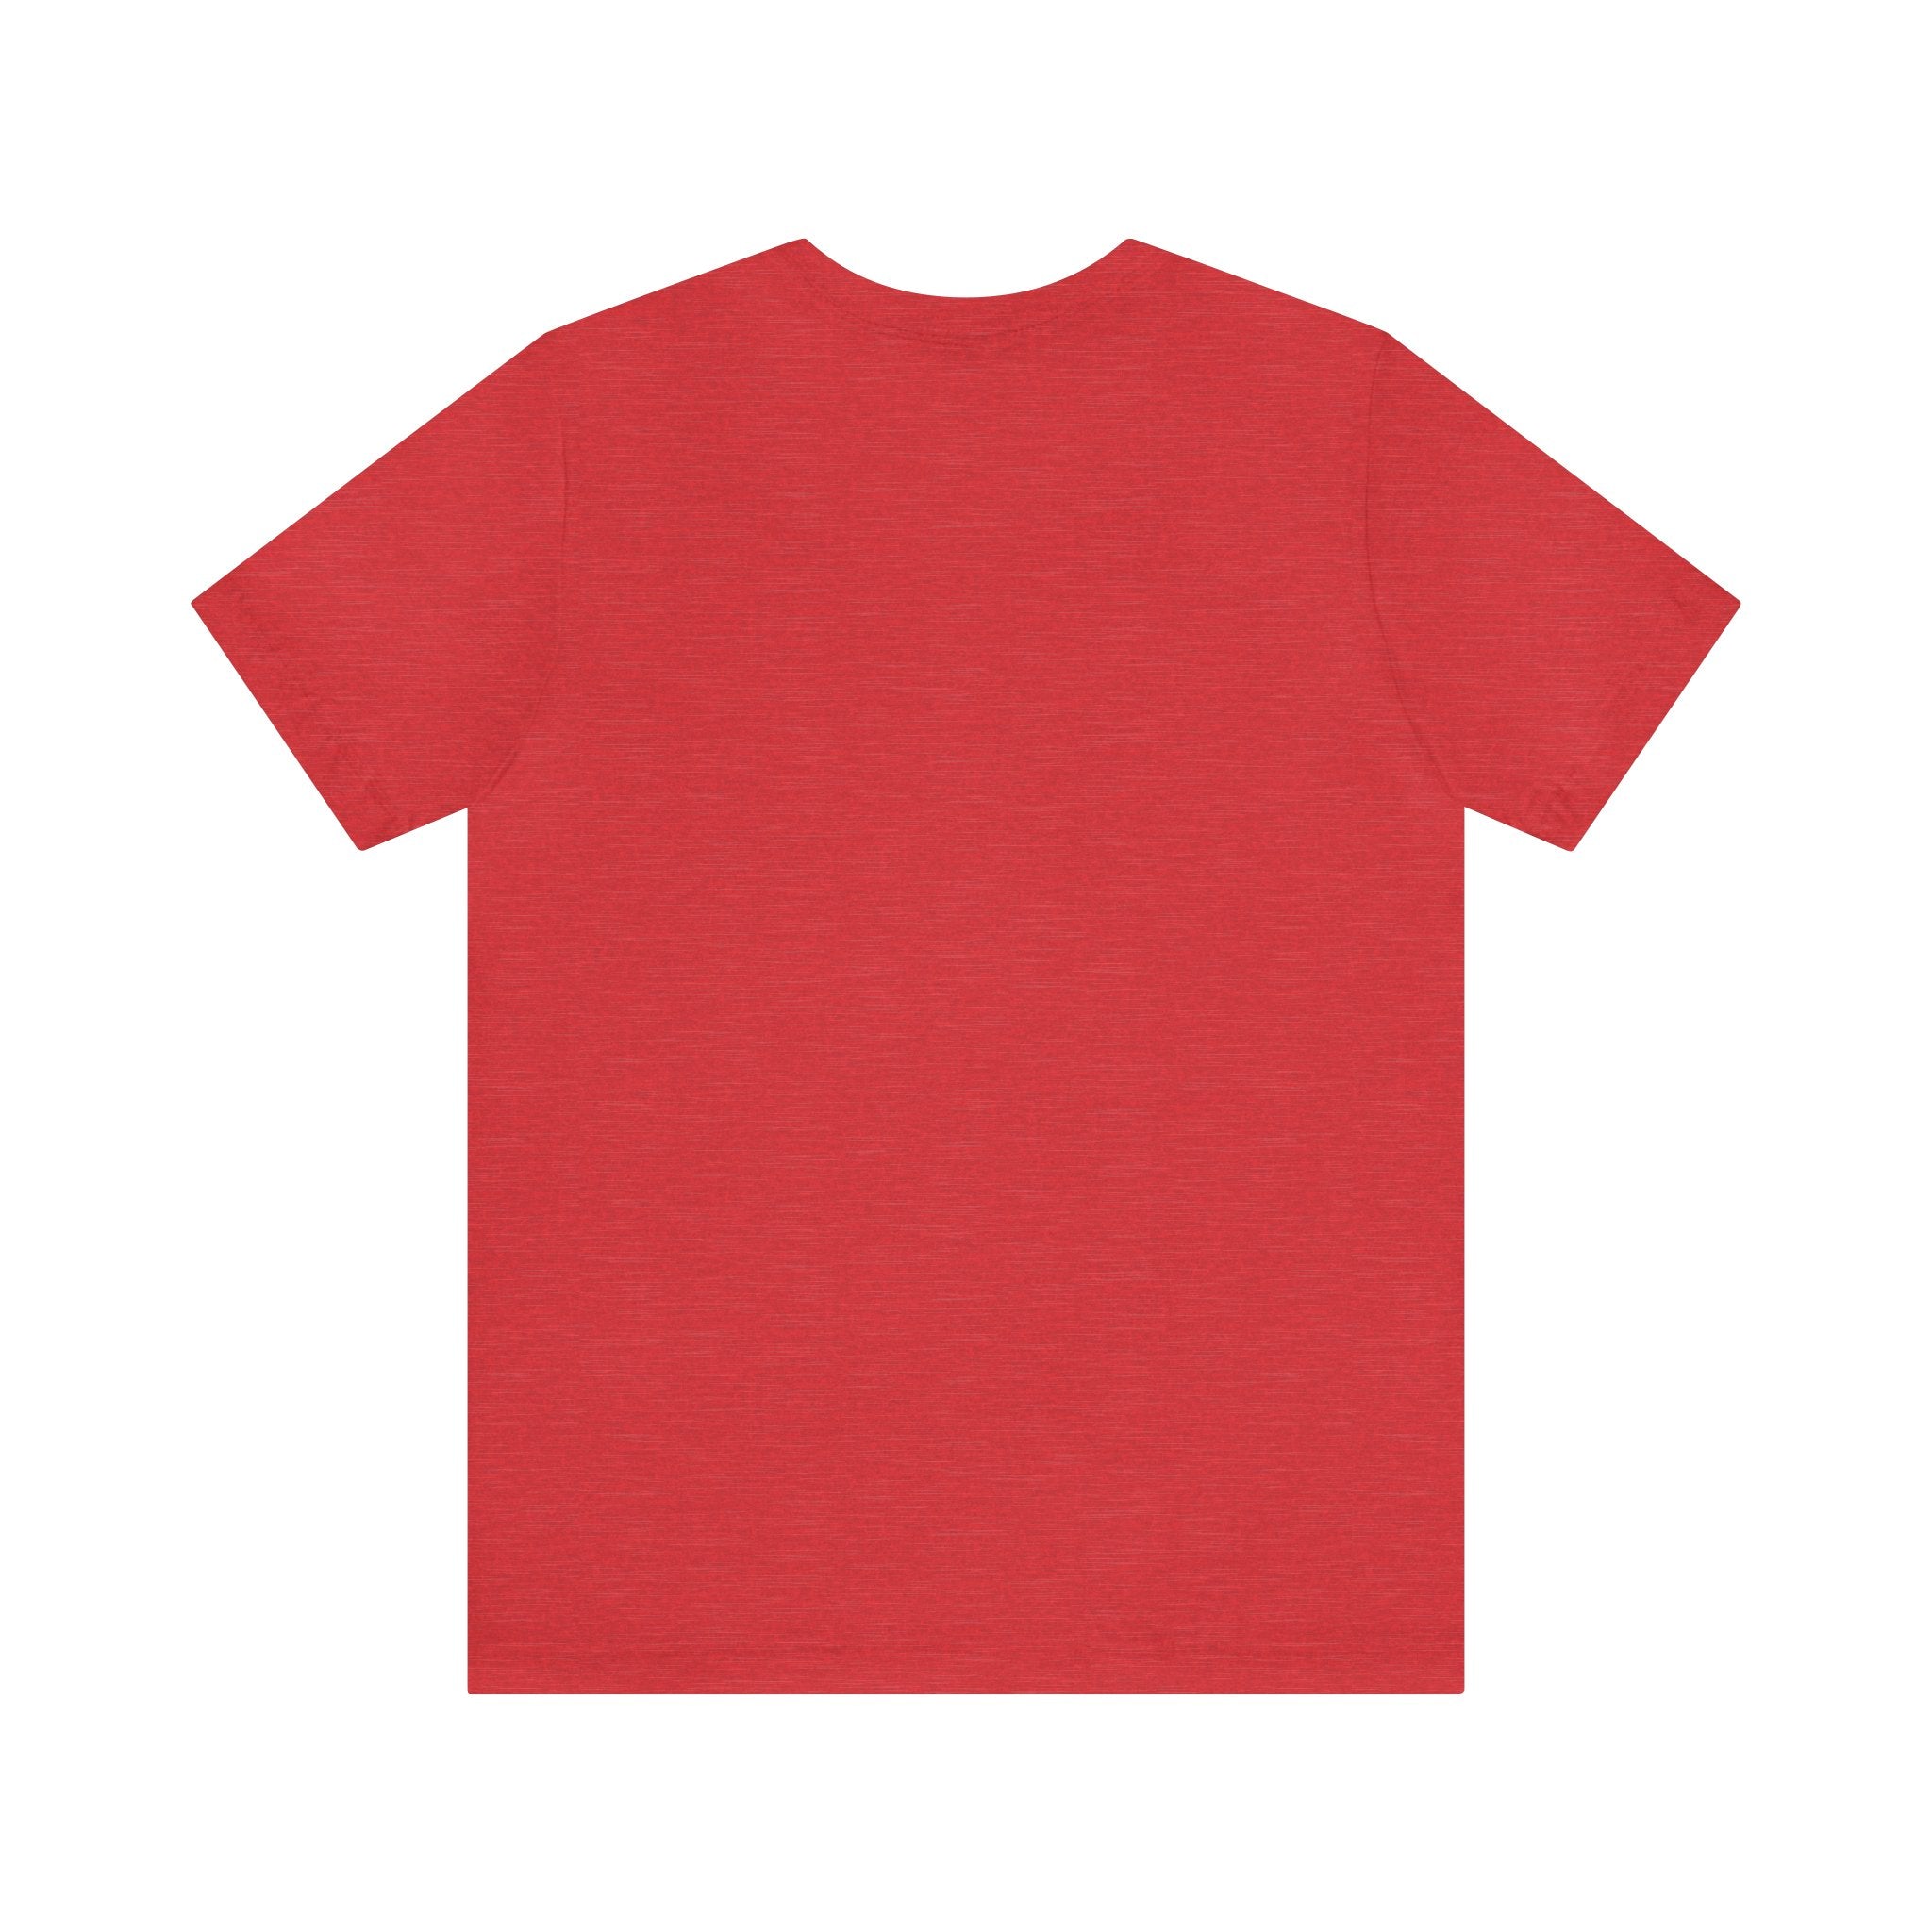 A red Bigger Than Yours T-shirt on a white background.